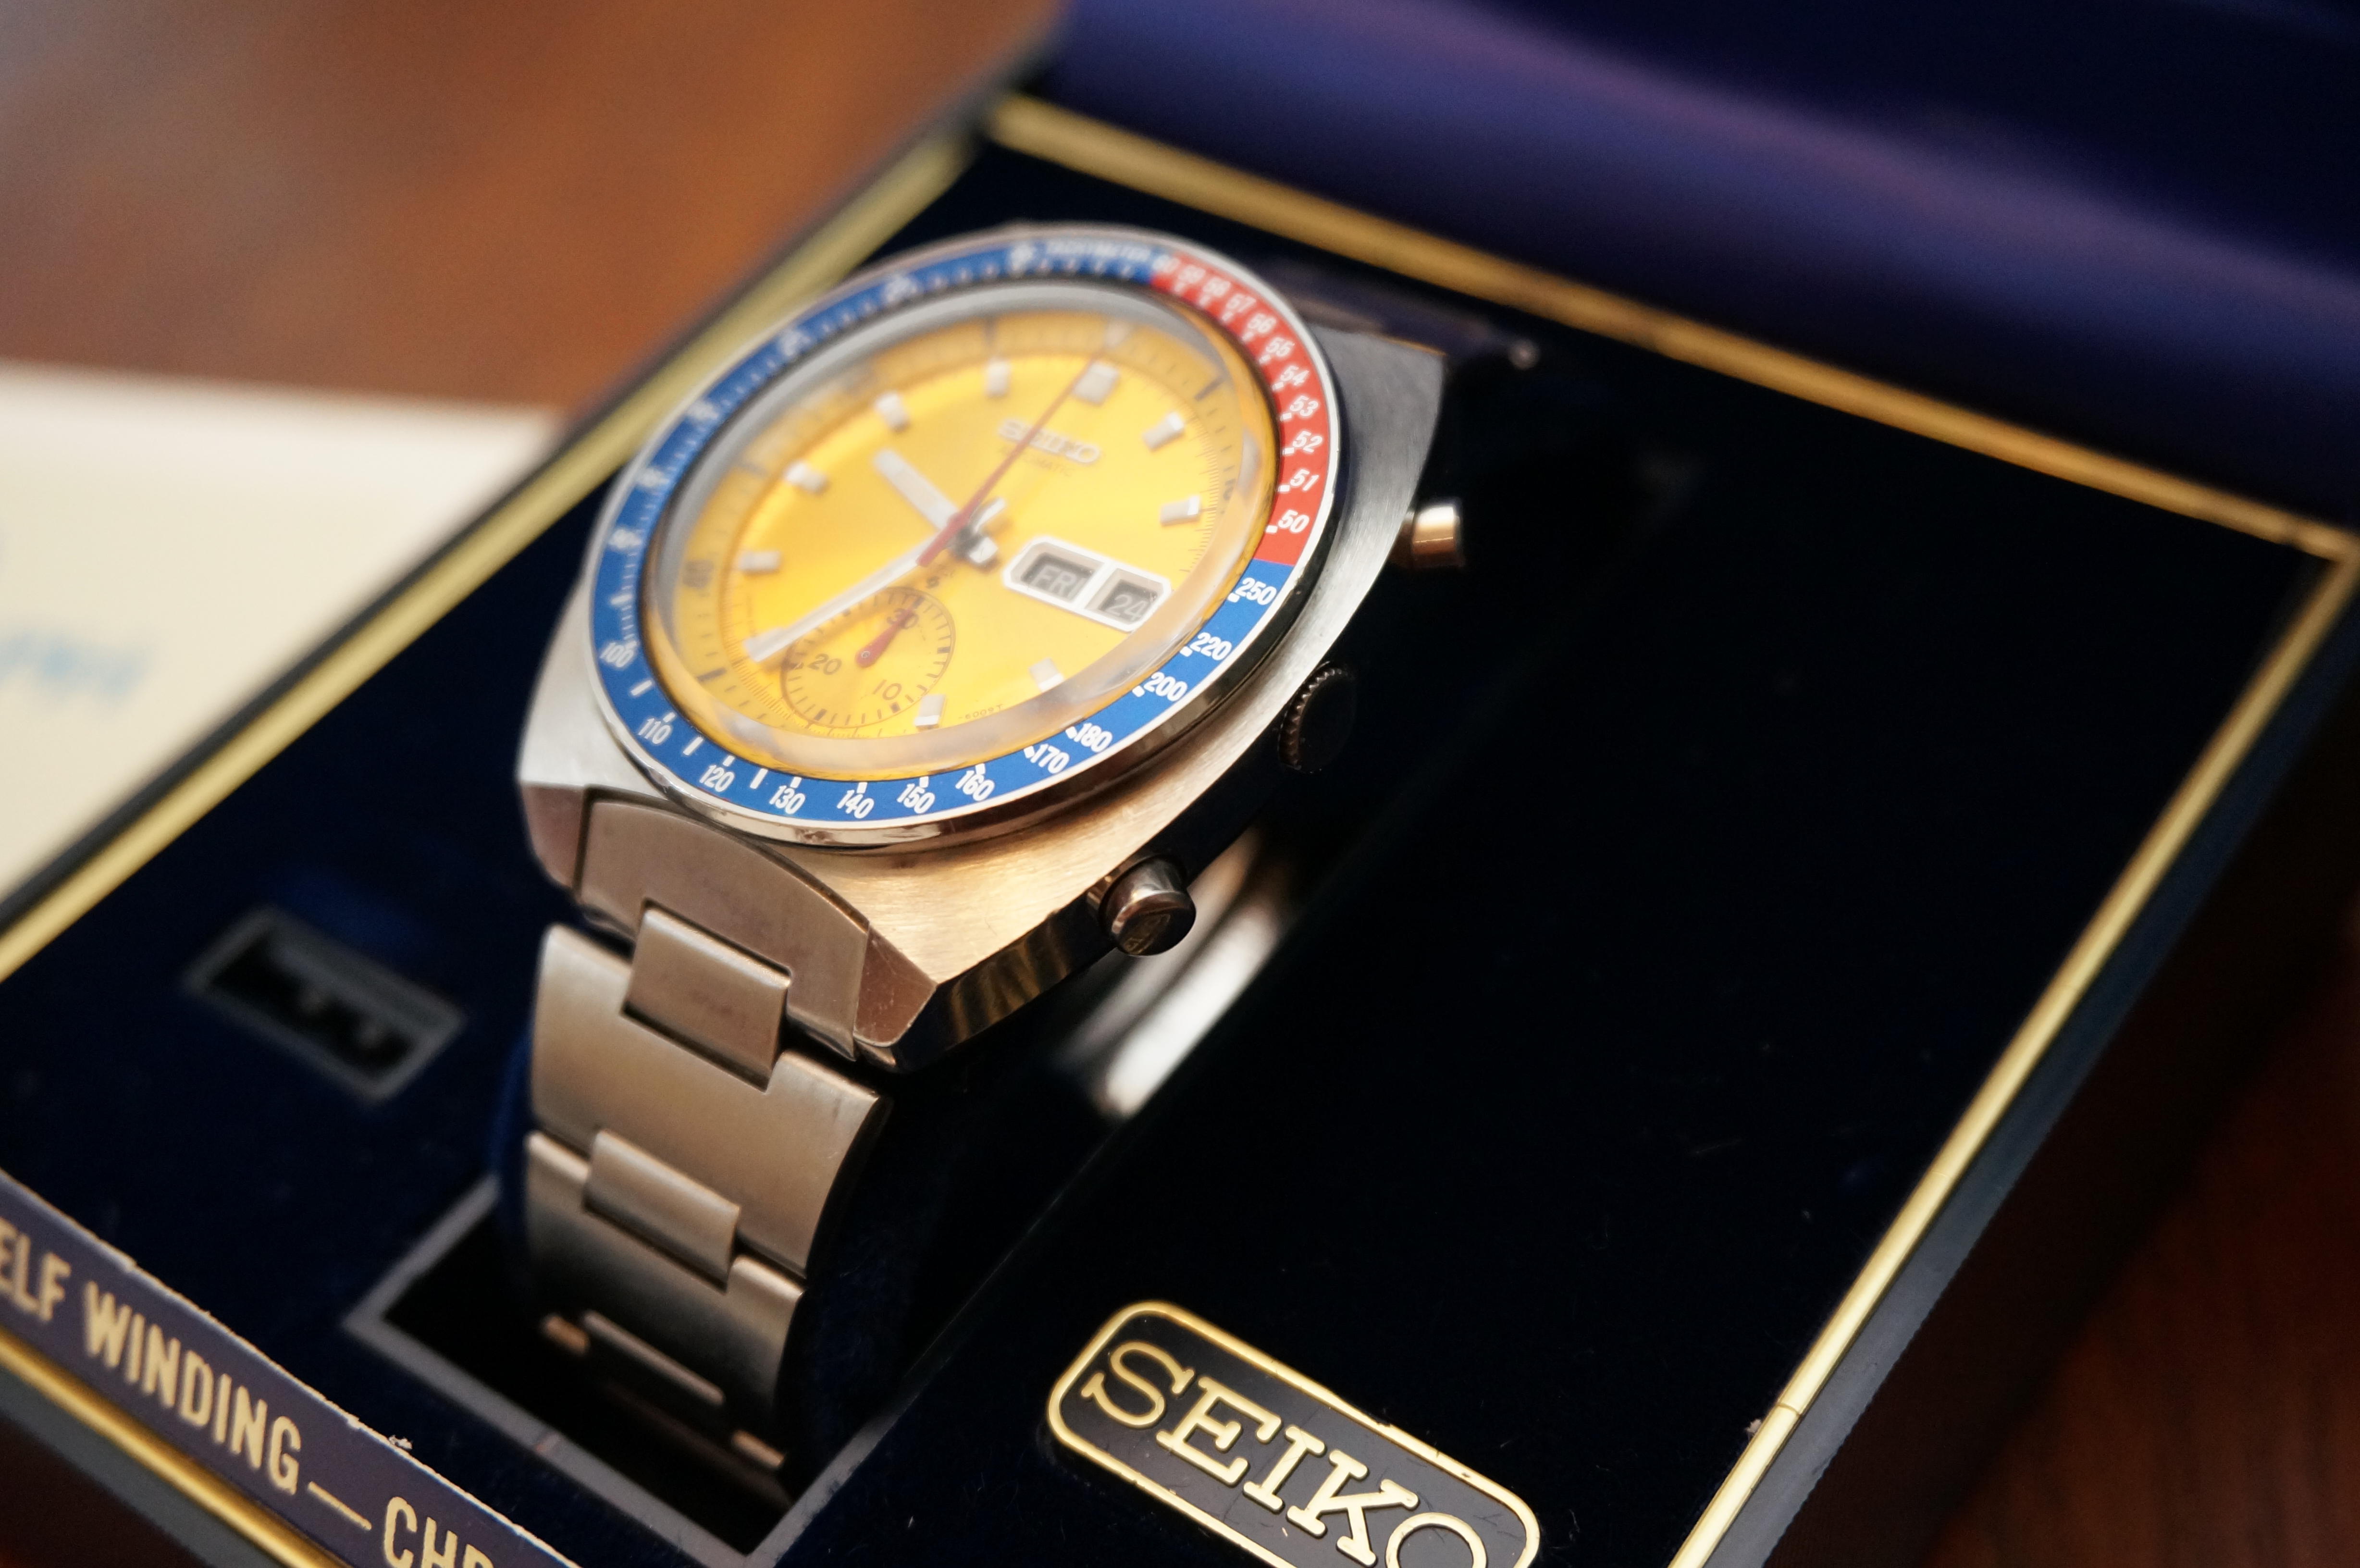 FS Seiko 6139-6005 Pogue 1975 Original Boxes, Owners Manual, Warranty Card,  and Links | WatchCharts